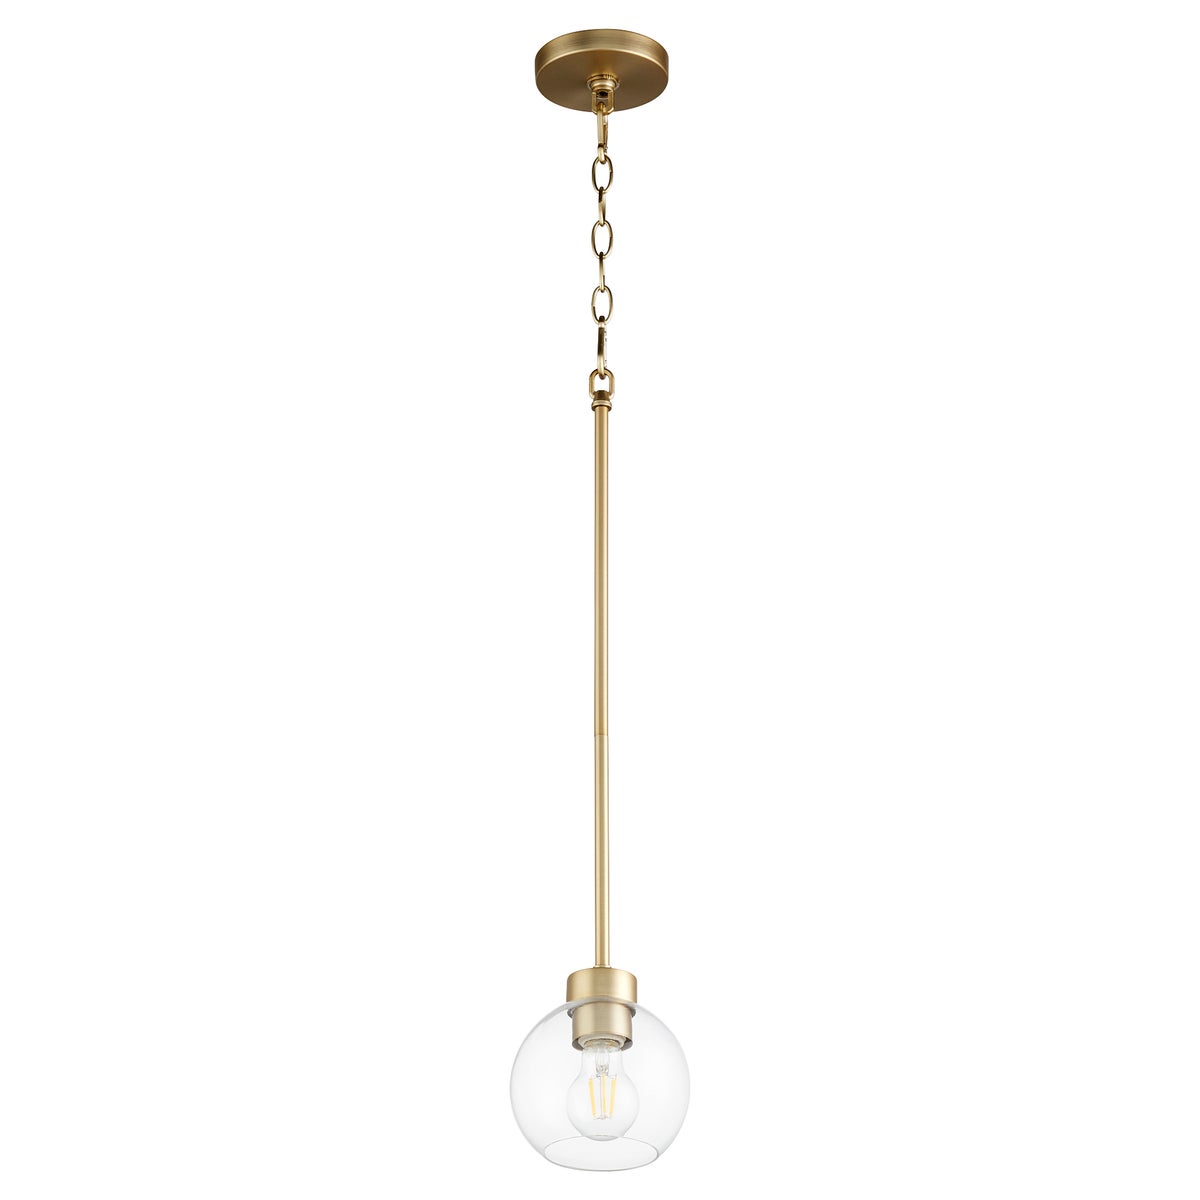 Transitional pendant light with clear glass globe and gold pole, adding a touch of mid-century elegance. Aged brass finish and thin acrylic accents elevate the look. Perfect addition to any space.